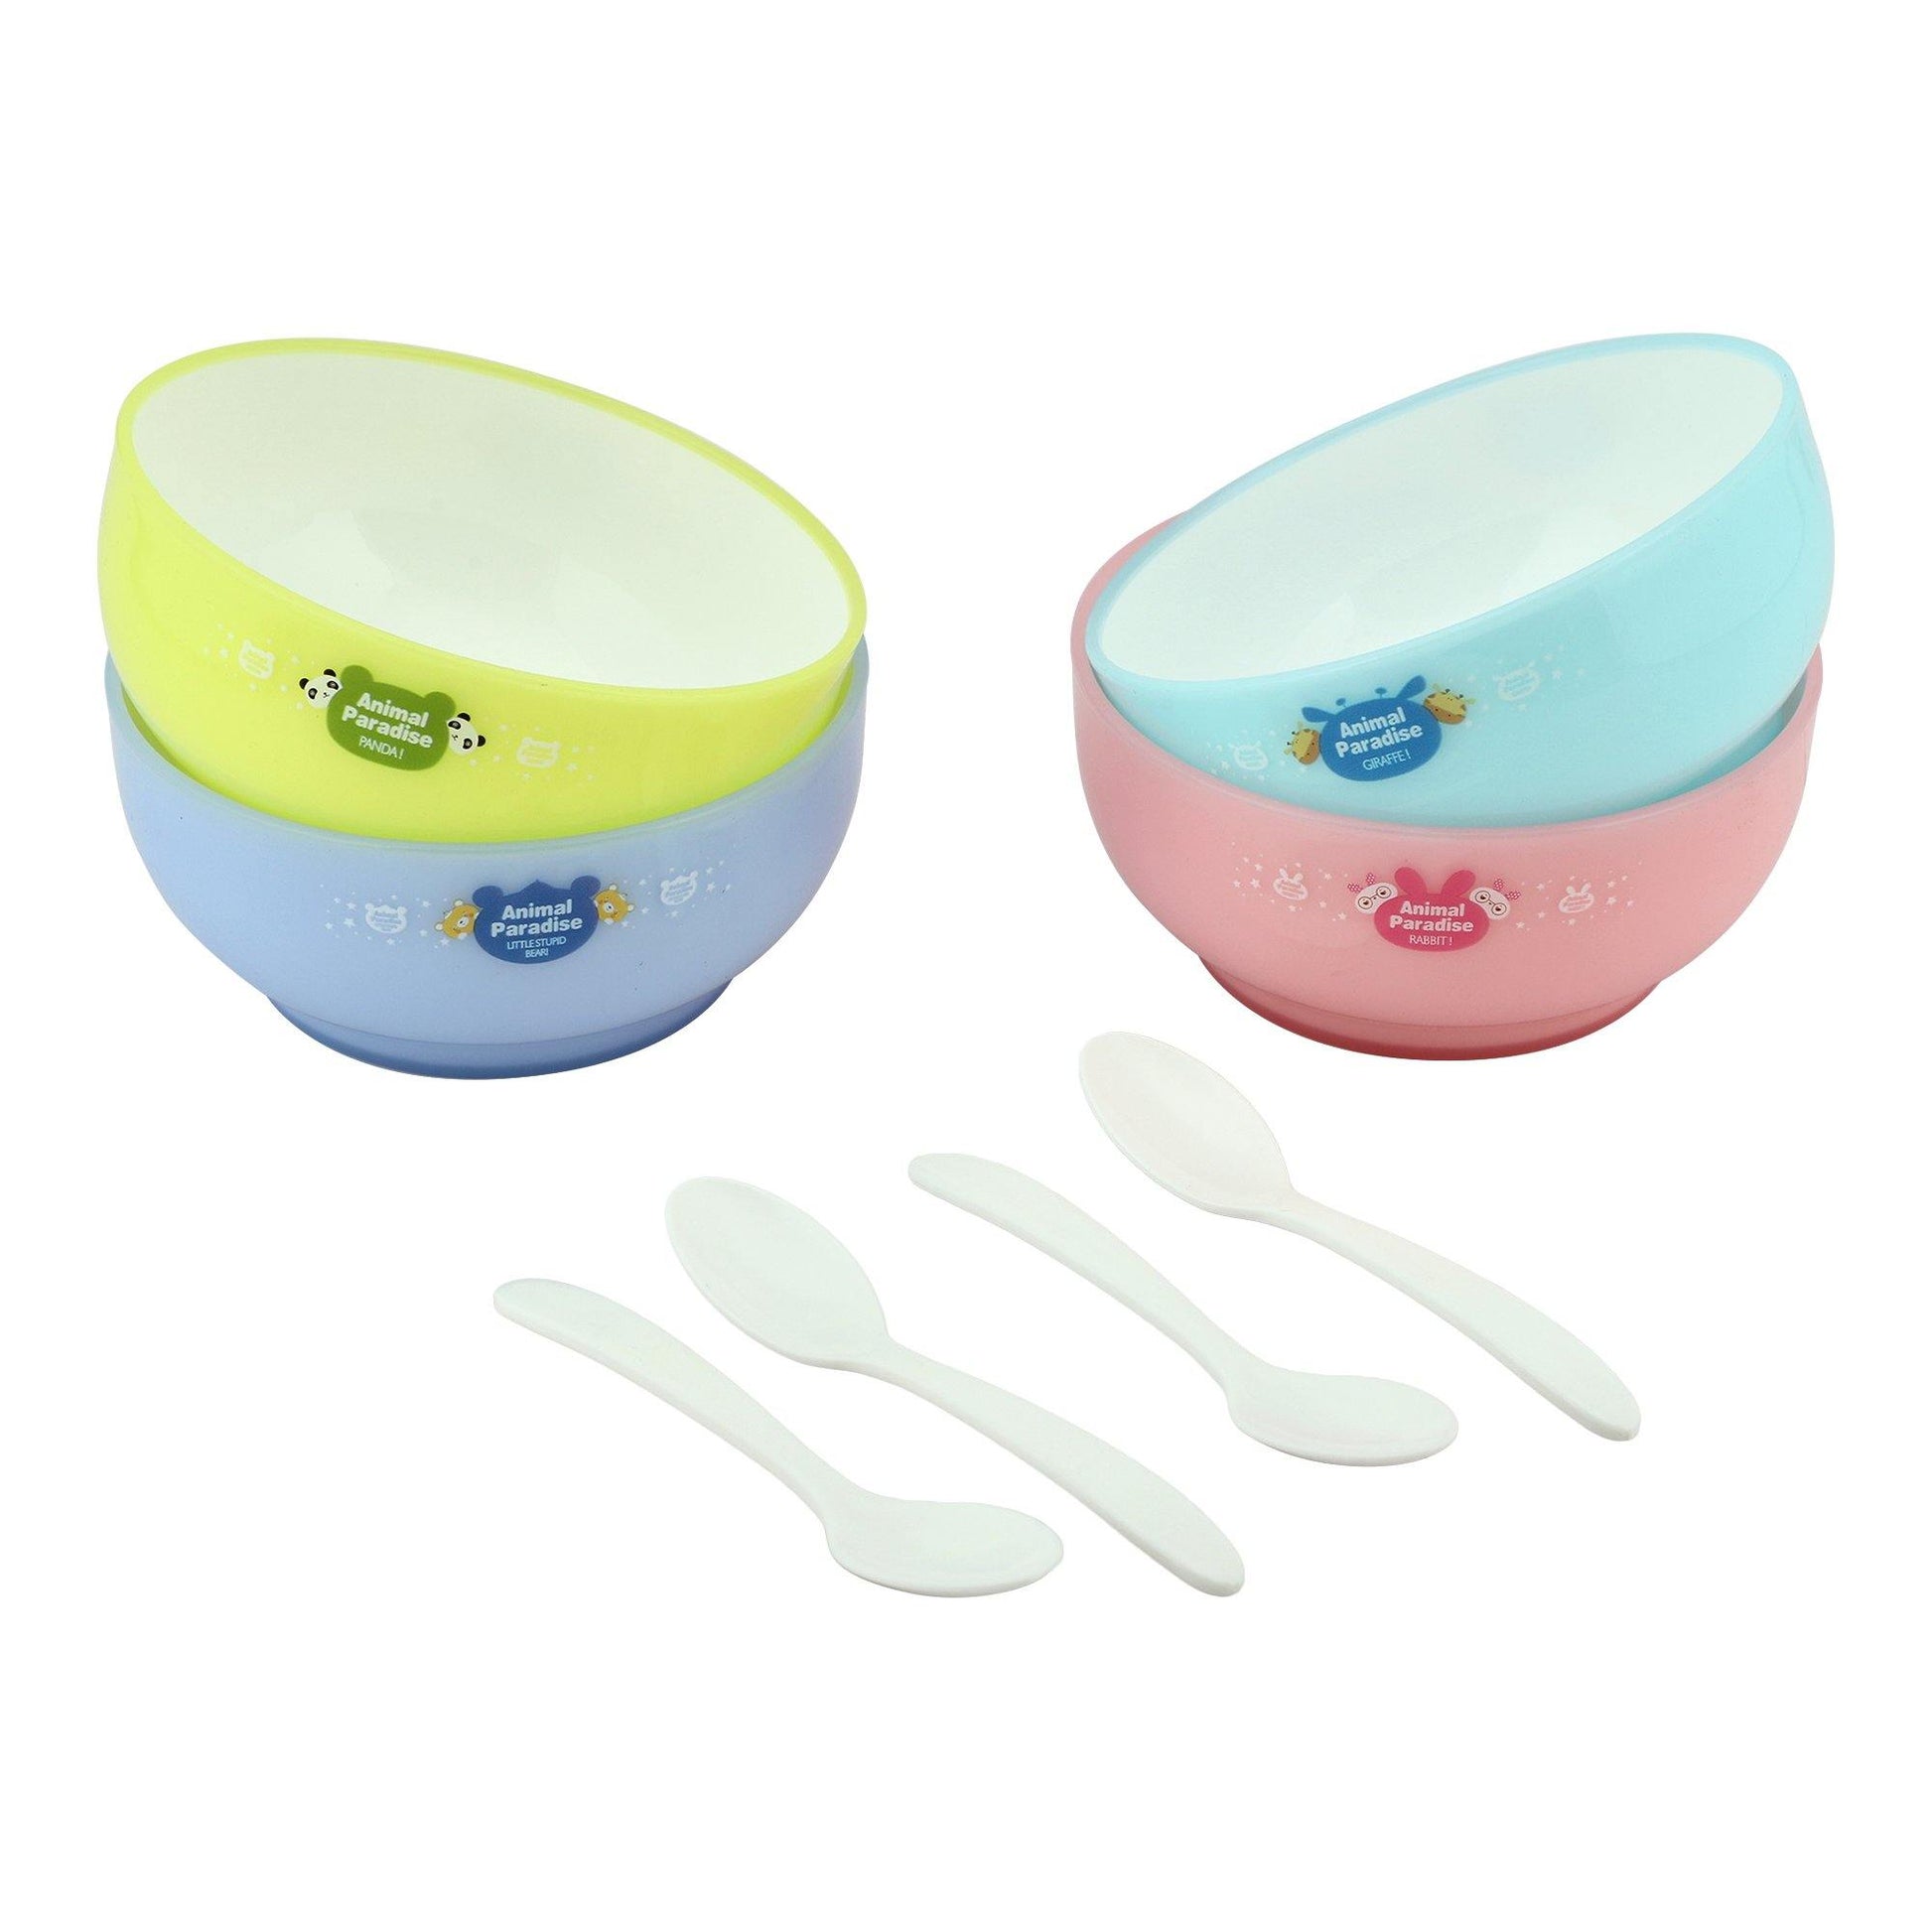 Bowl and spoon set for kids - The Umbrella store